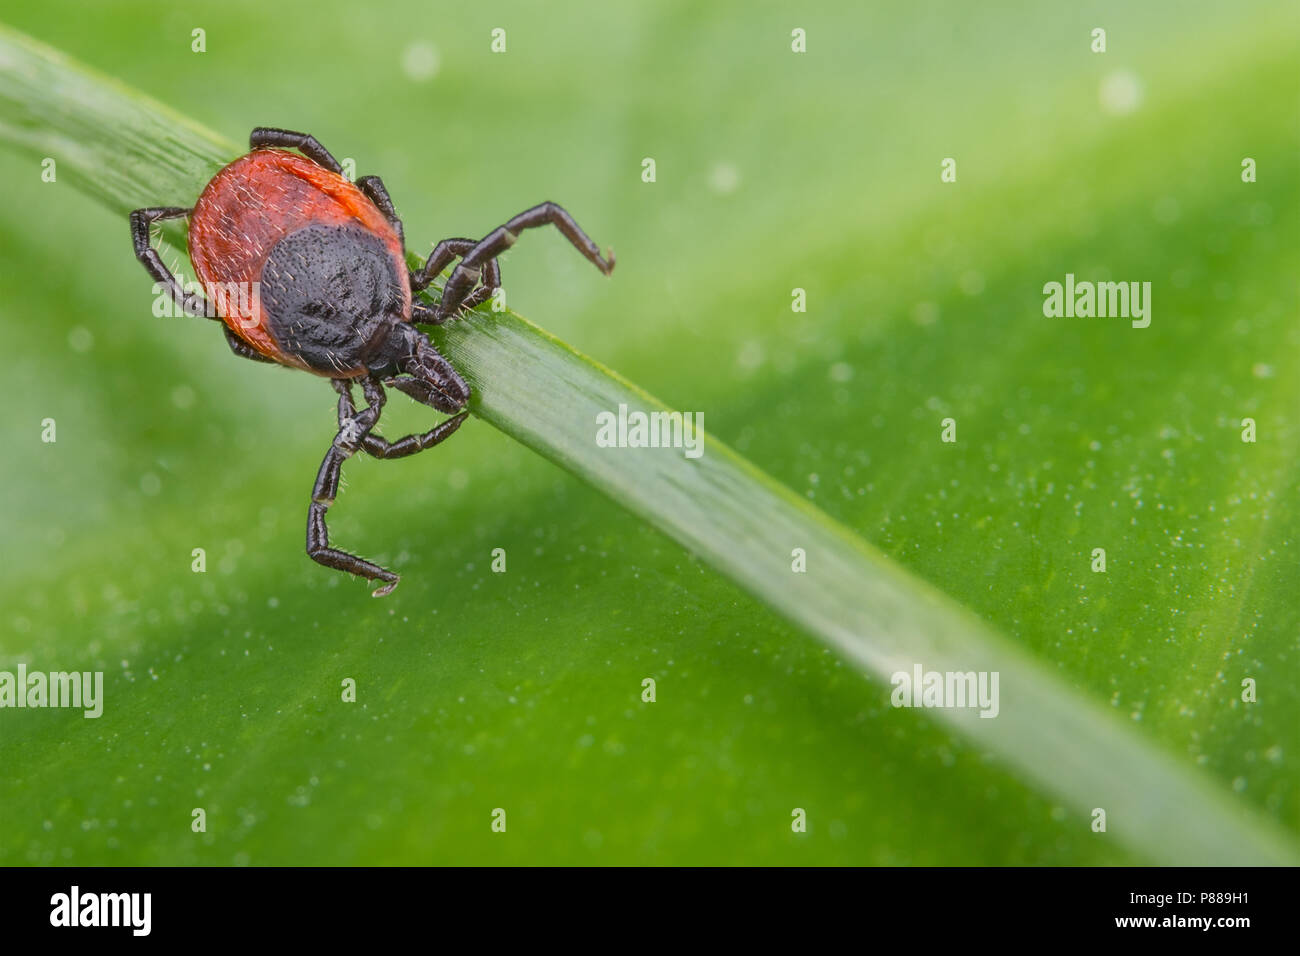 Deer tick lurking on grass stem. Ixodes ricinus. Detail of natural green leaf in background. Dangerous parasite carrying encephalitis and borreliosis. Stock Photo